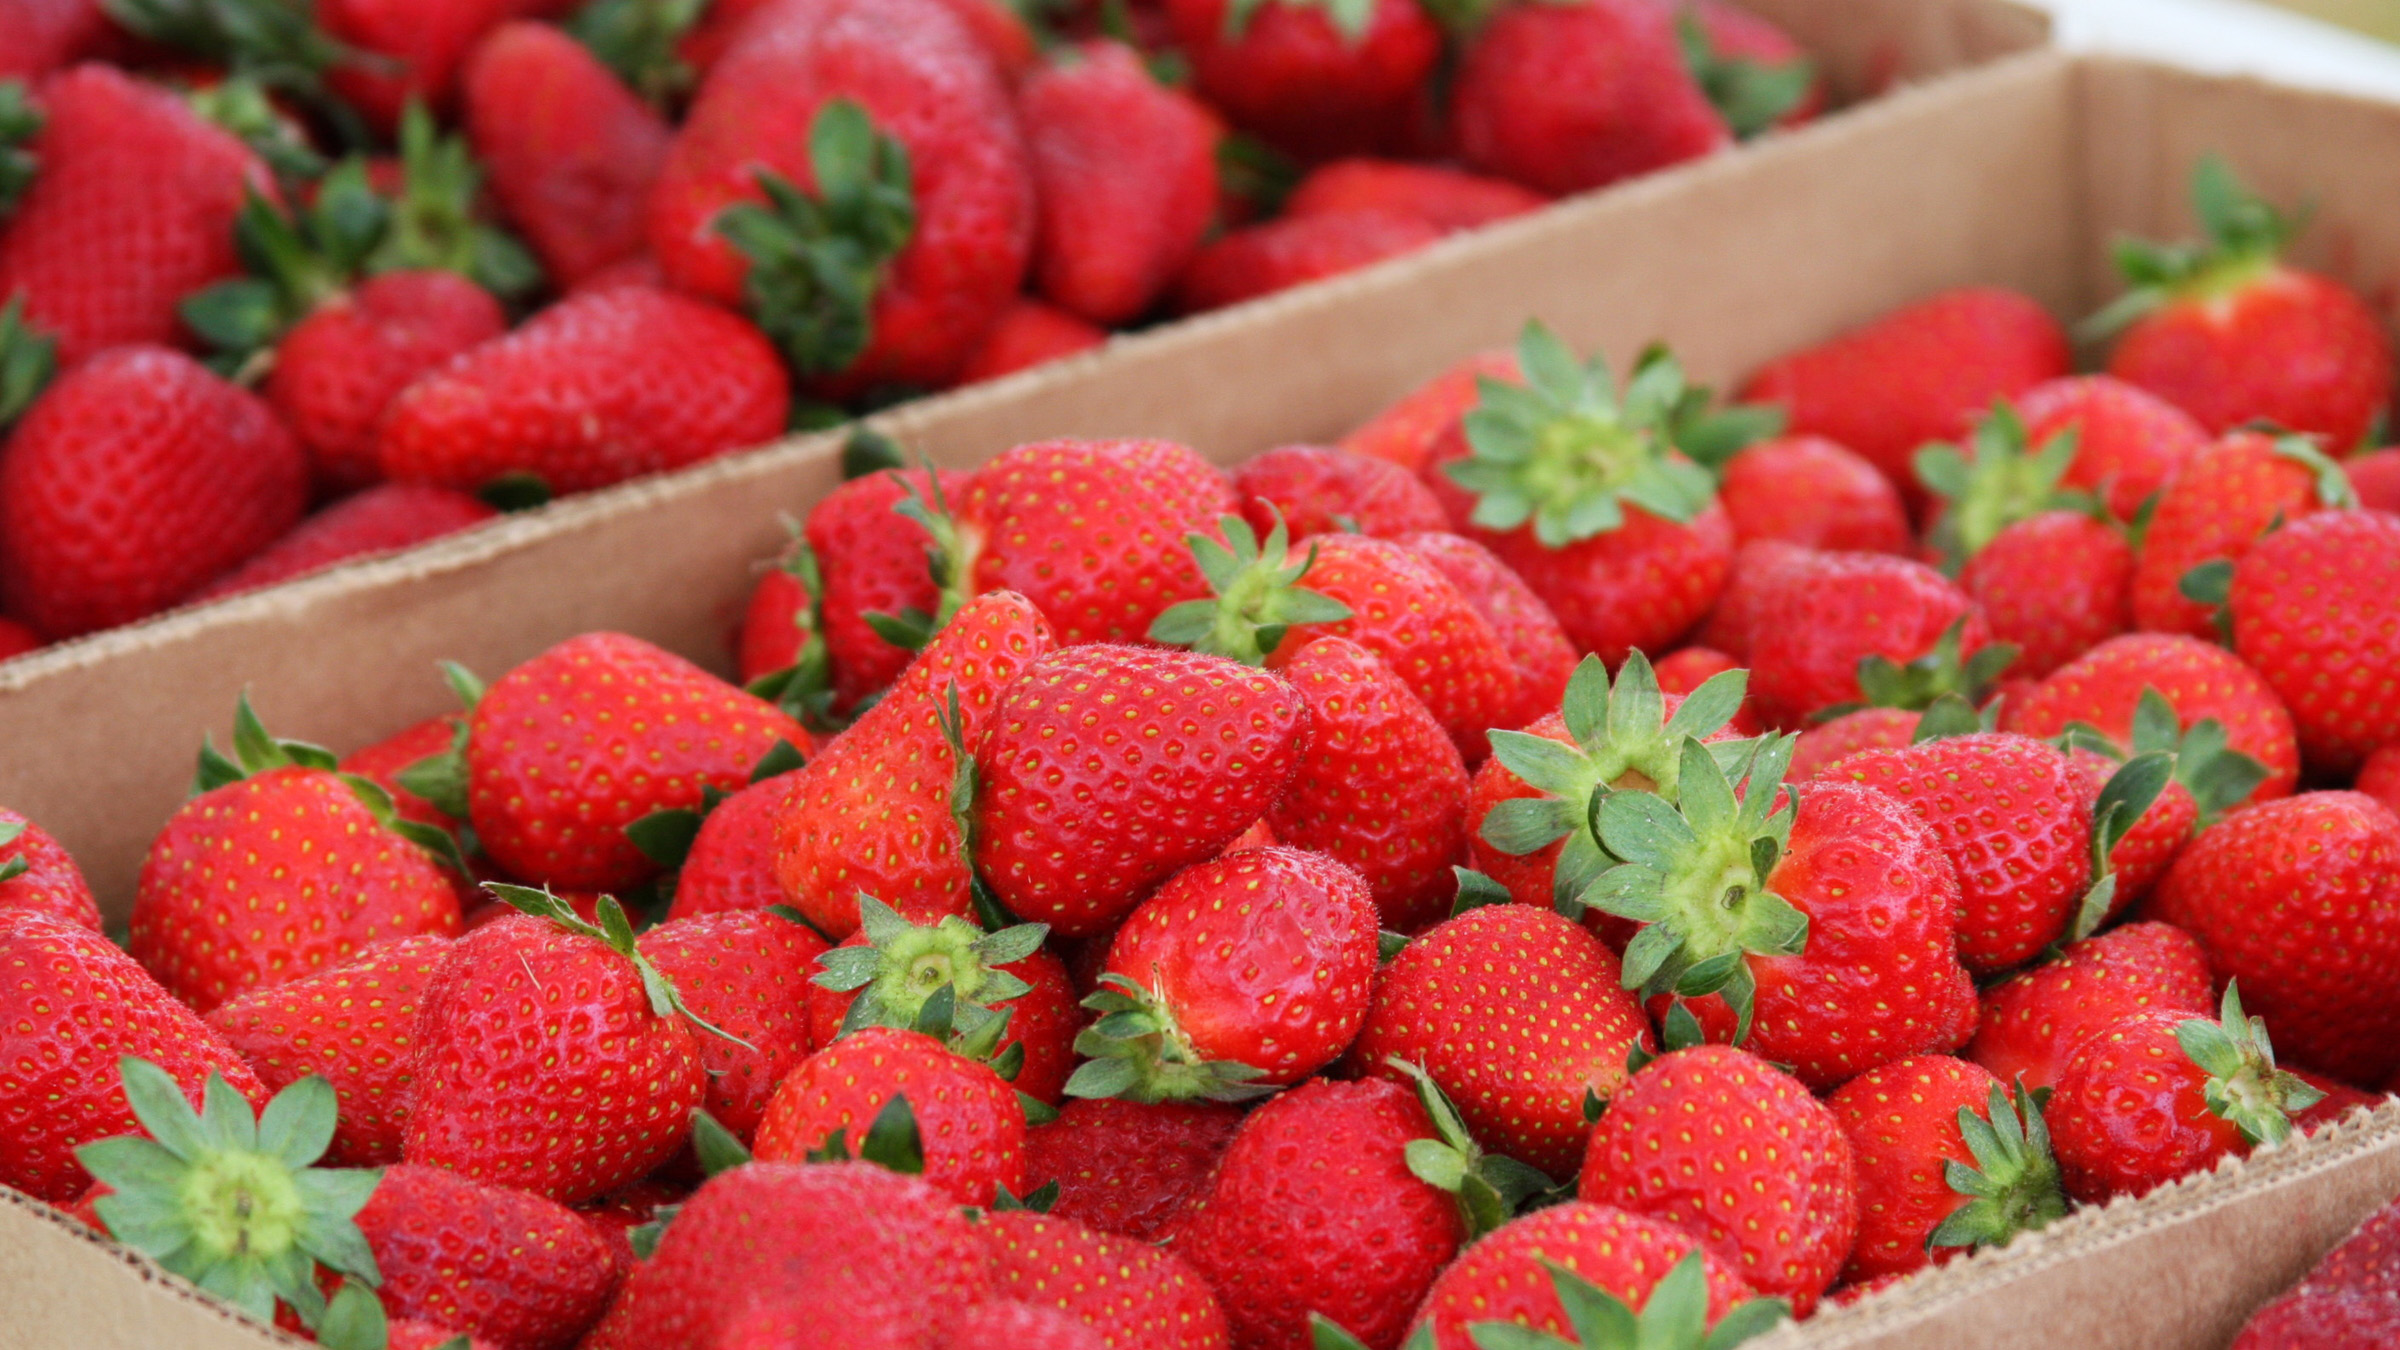 Fresh strawberries in boxes at a farmers market